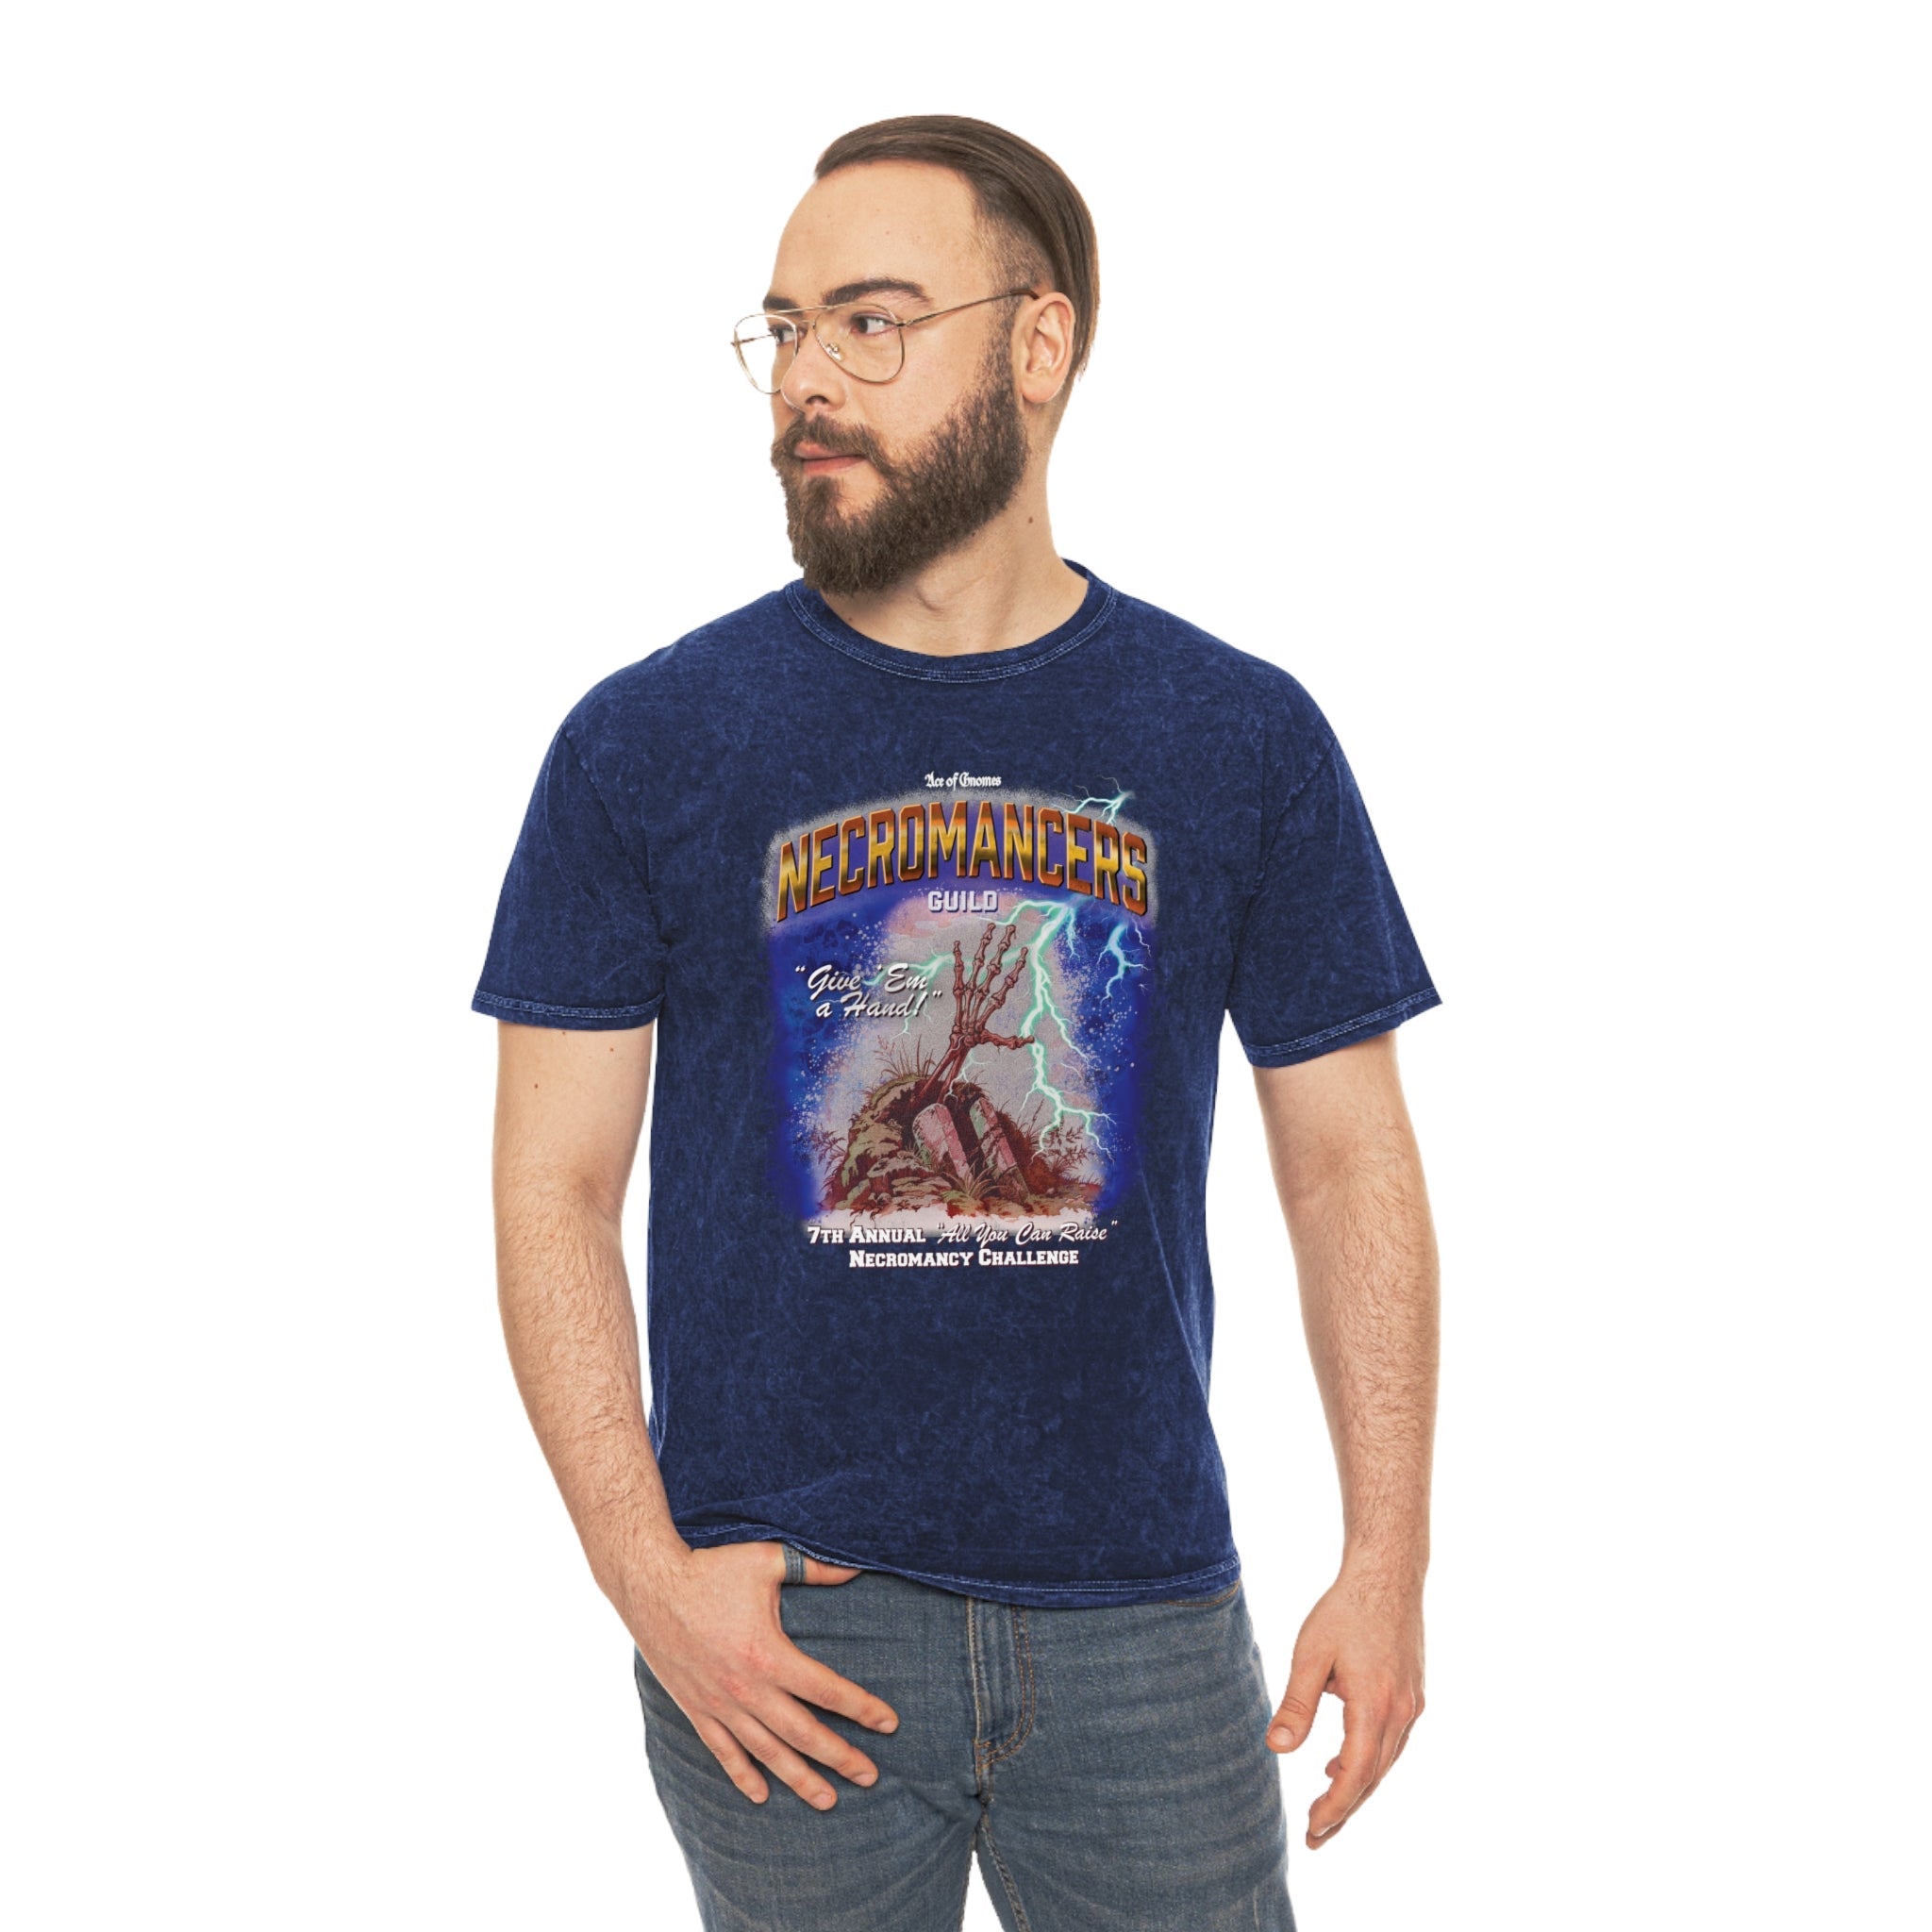 Necromancers Guild | Mineral Wash T-Shirt - T-Shirt - Ace of Gnomes - 17015850292605813787